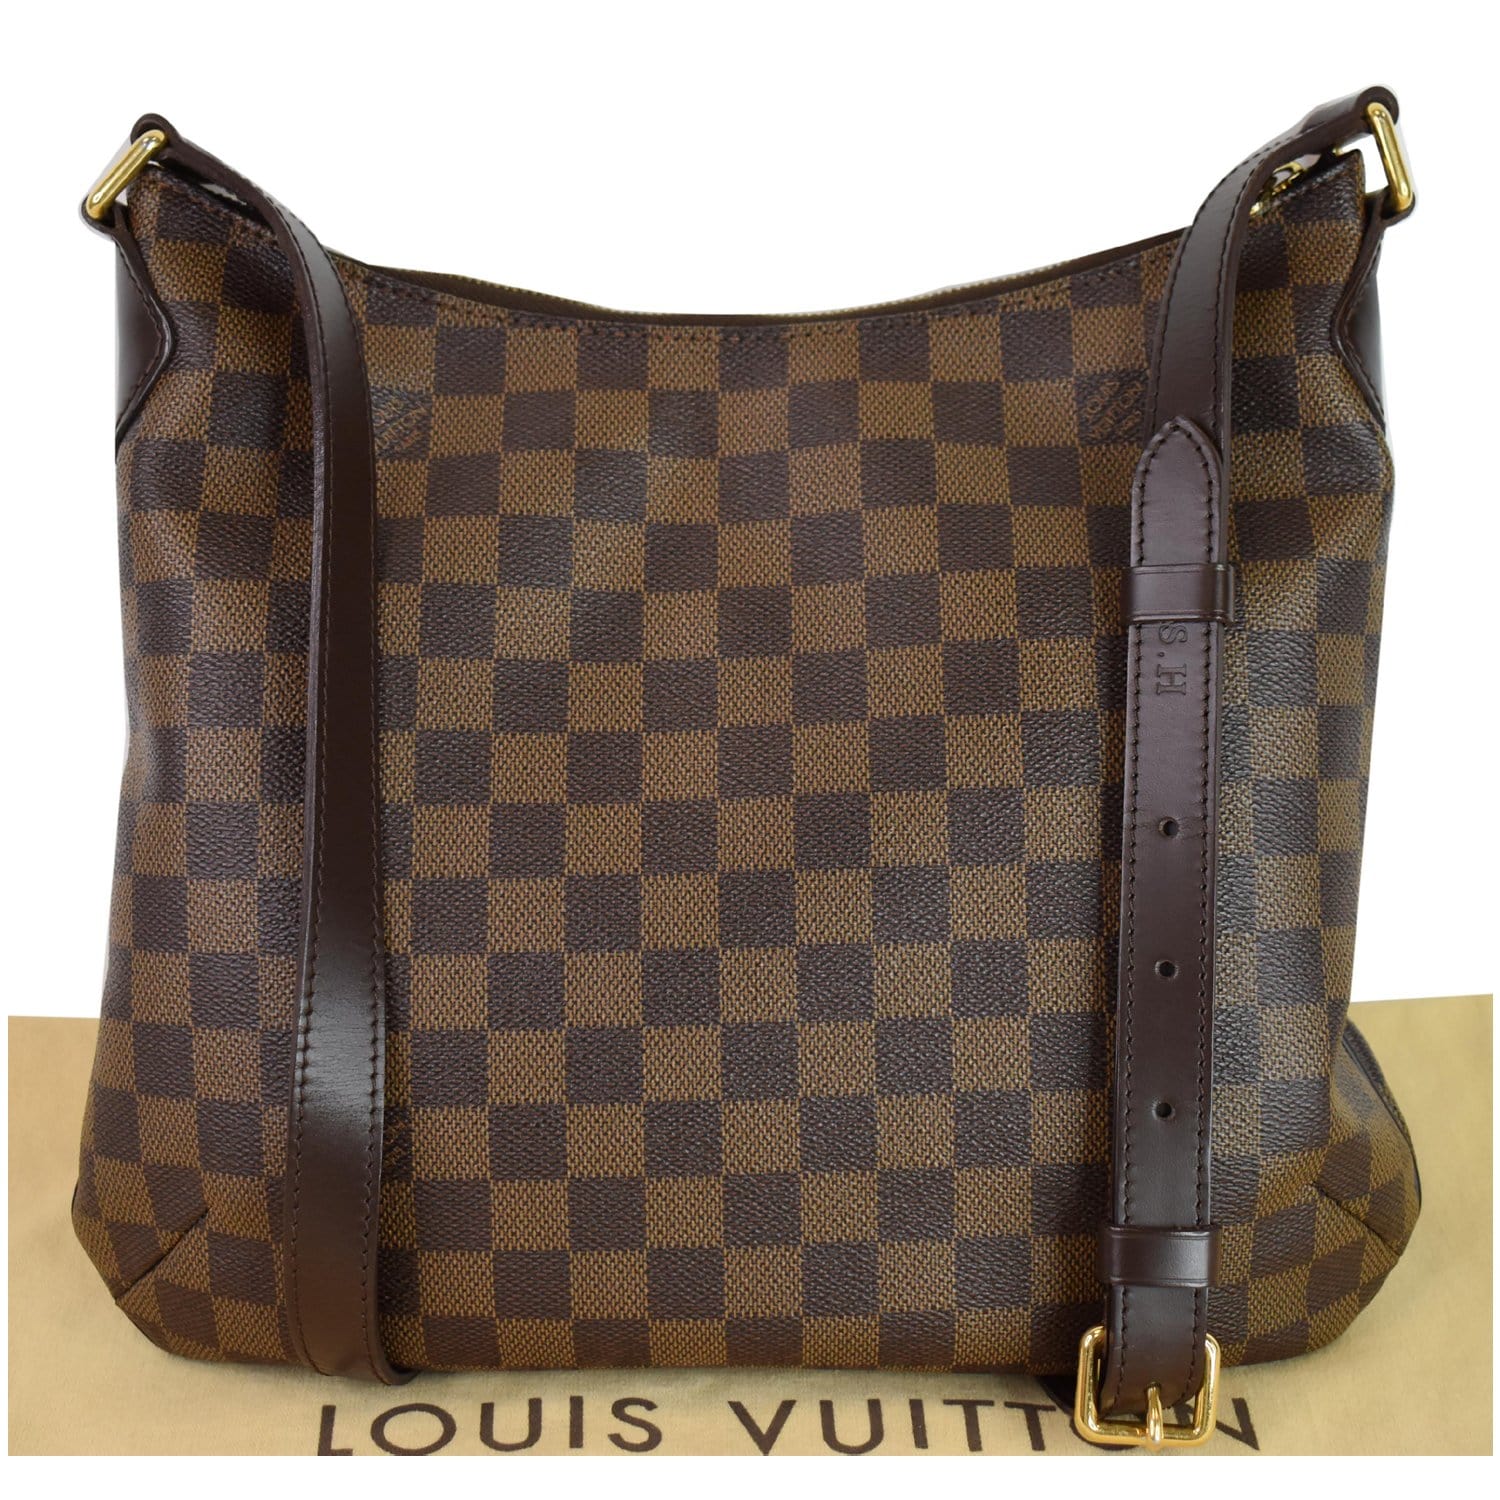 Bloomsbury leather crossbody bag Louis Vuitton Brown in Leather - 37305521